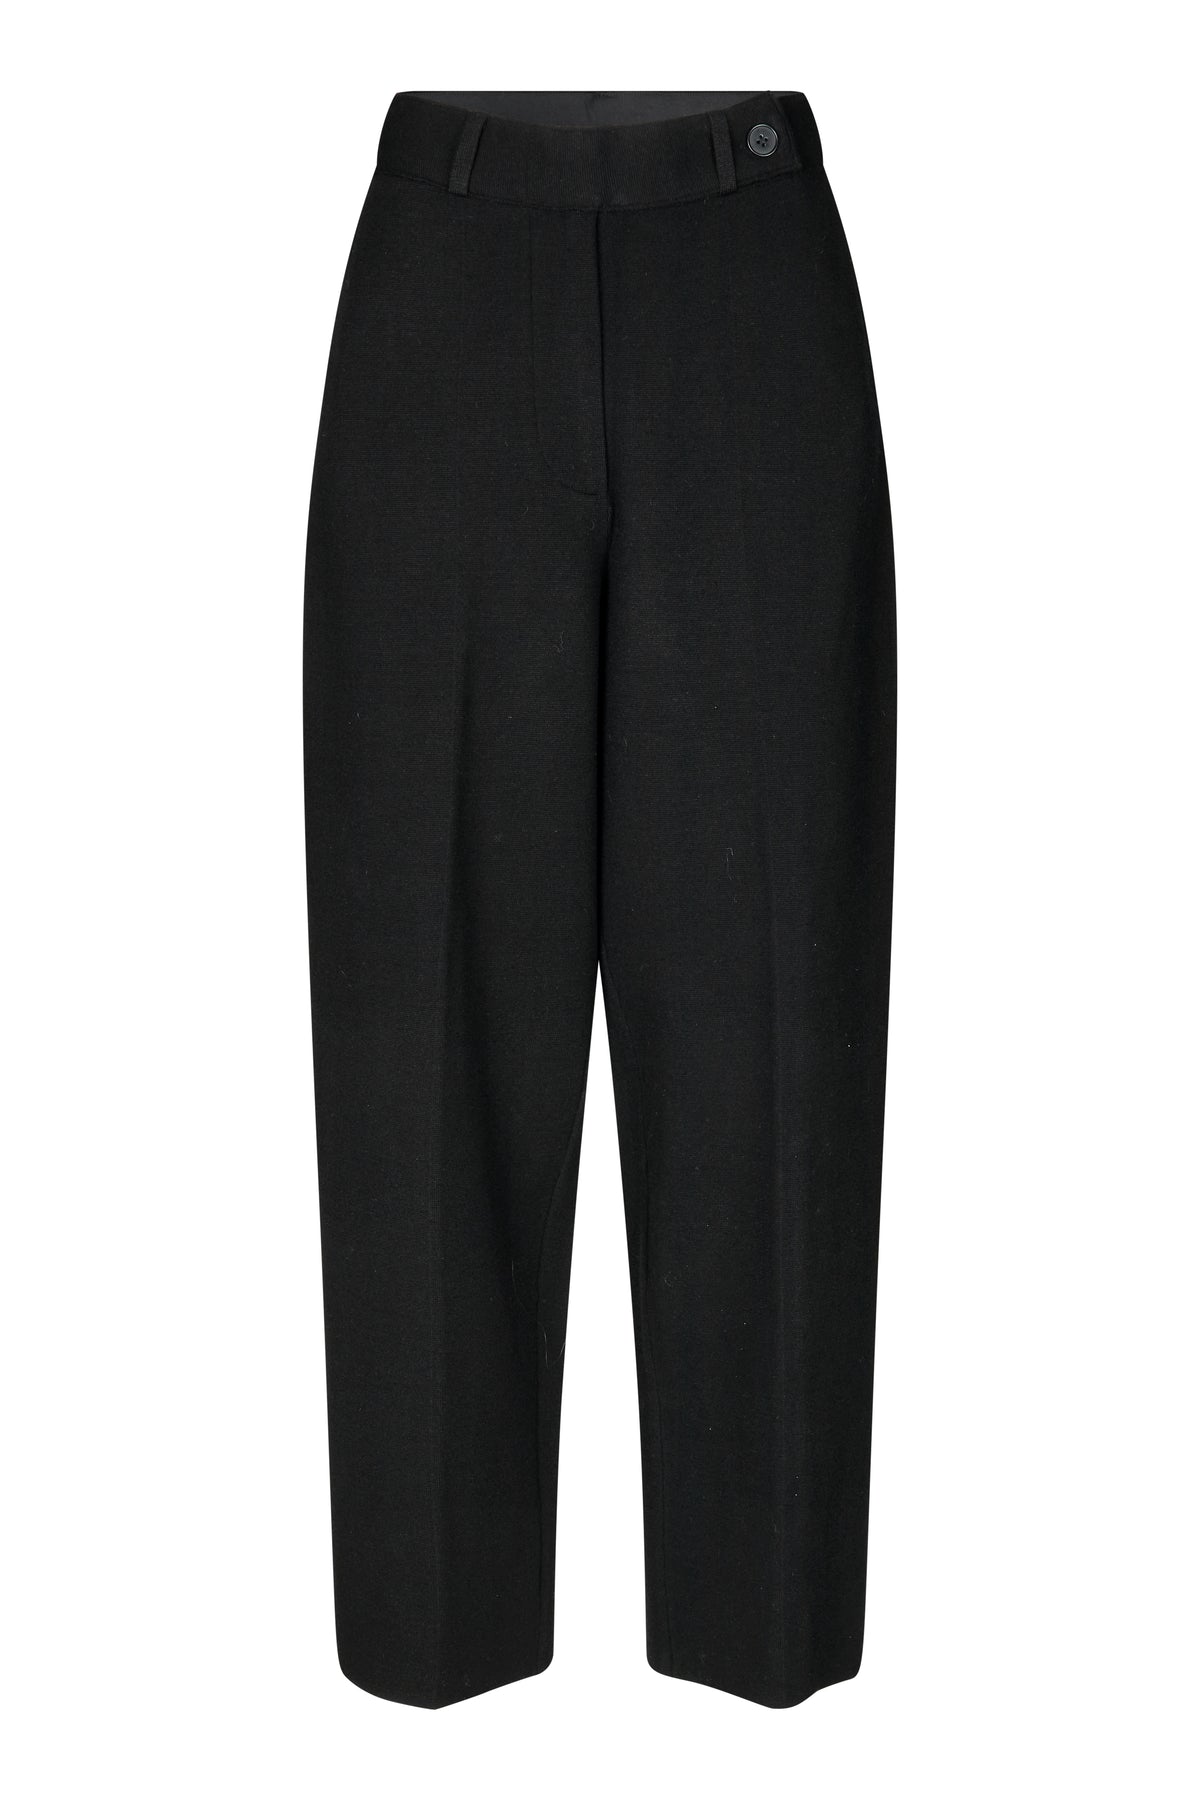 Straight leg heavy knitted black trousers